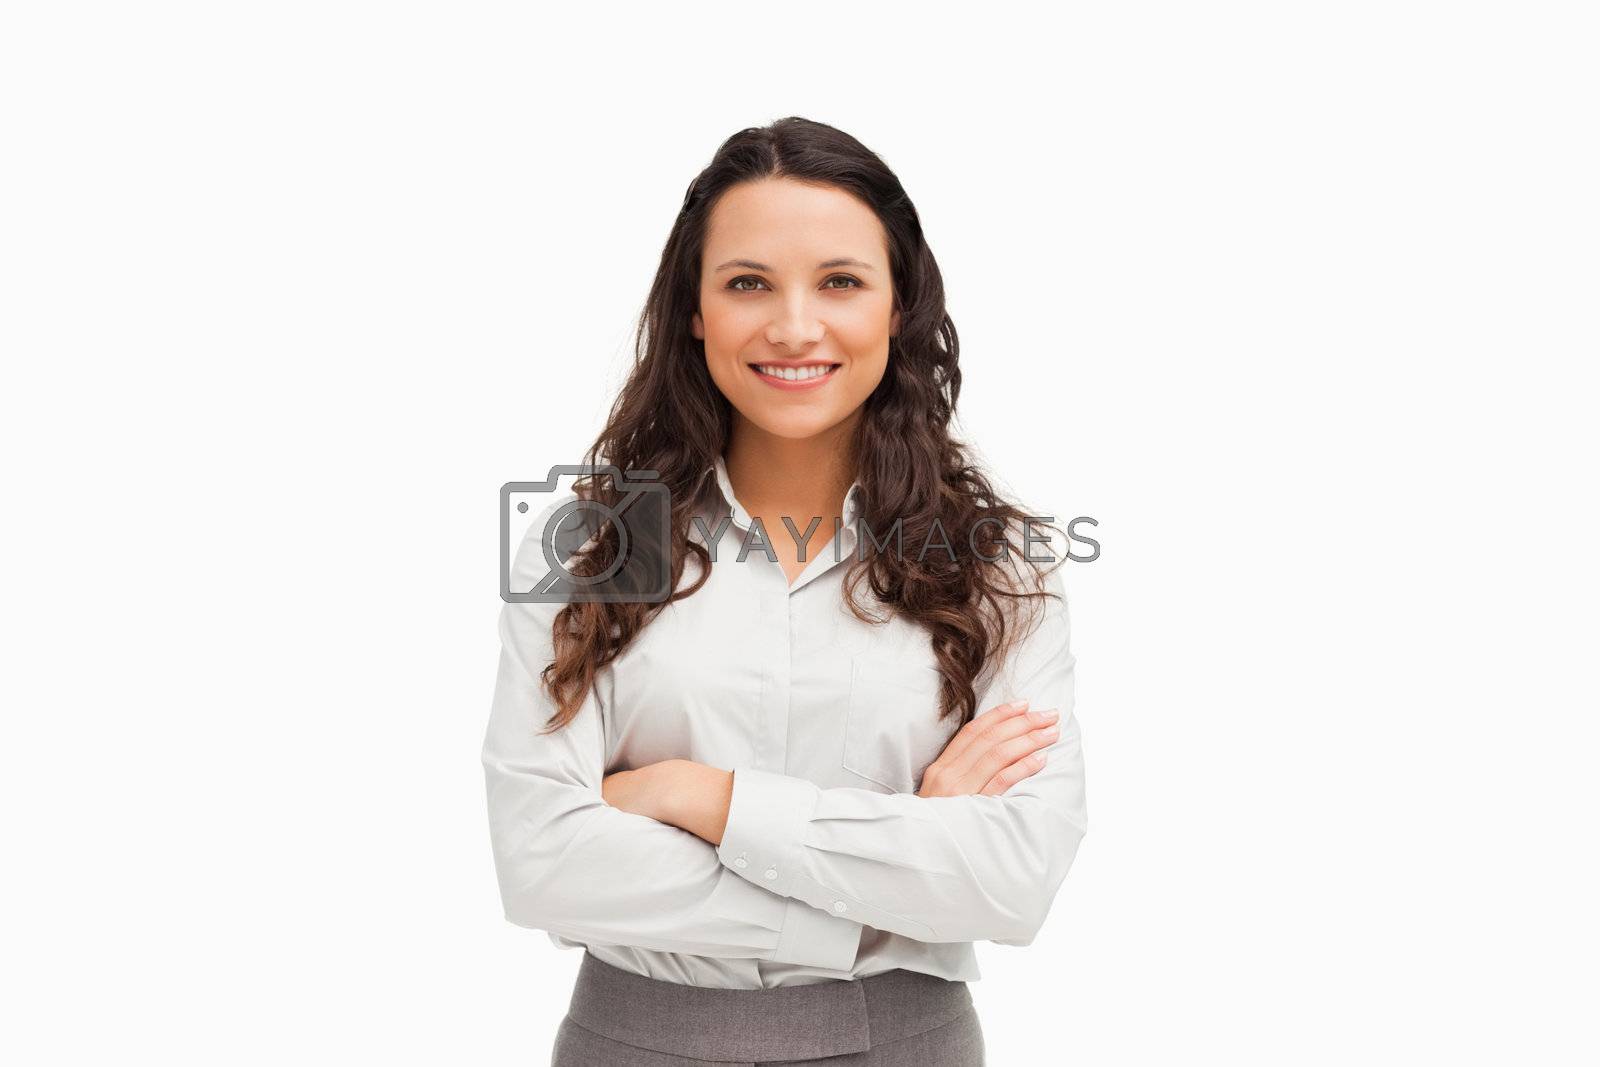 Royalty free image of Portrait of an employee with folded arms by Wavebreakmedia